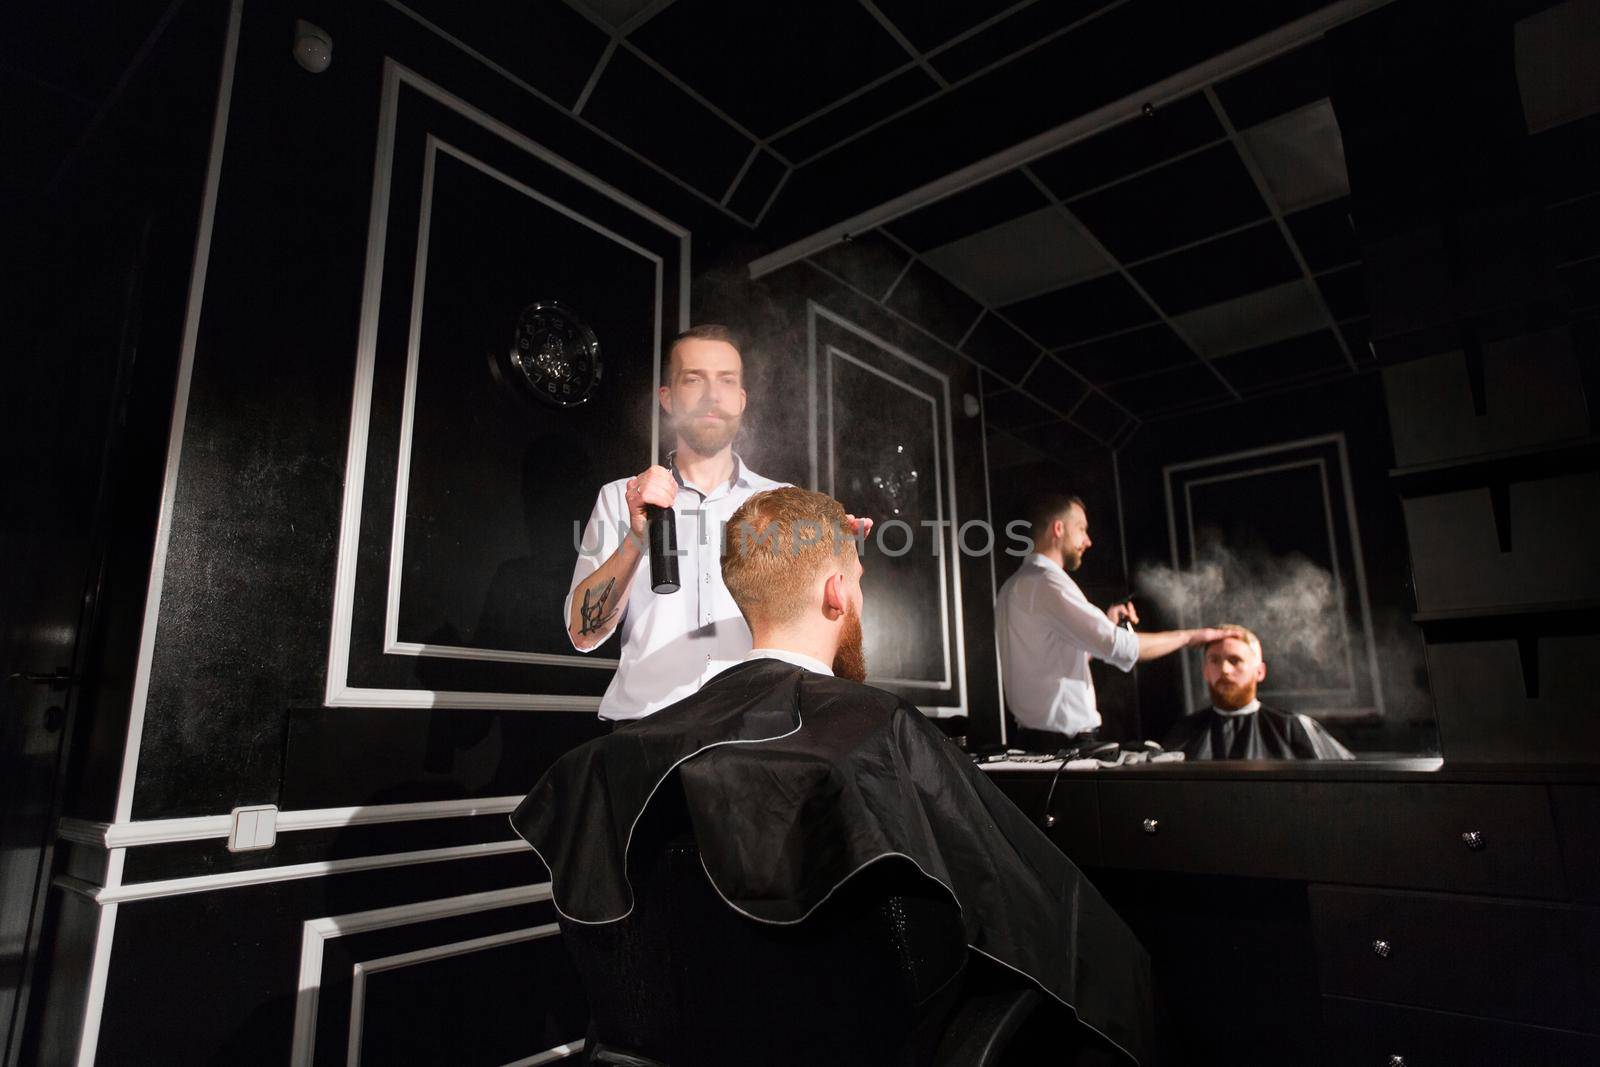 Spraying hair. Portrait of a barber spraying water on the hair of the client. by StudioPeace